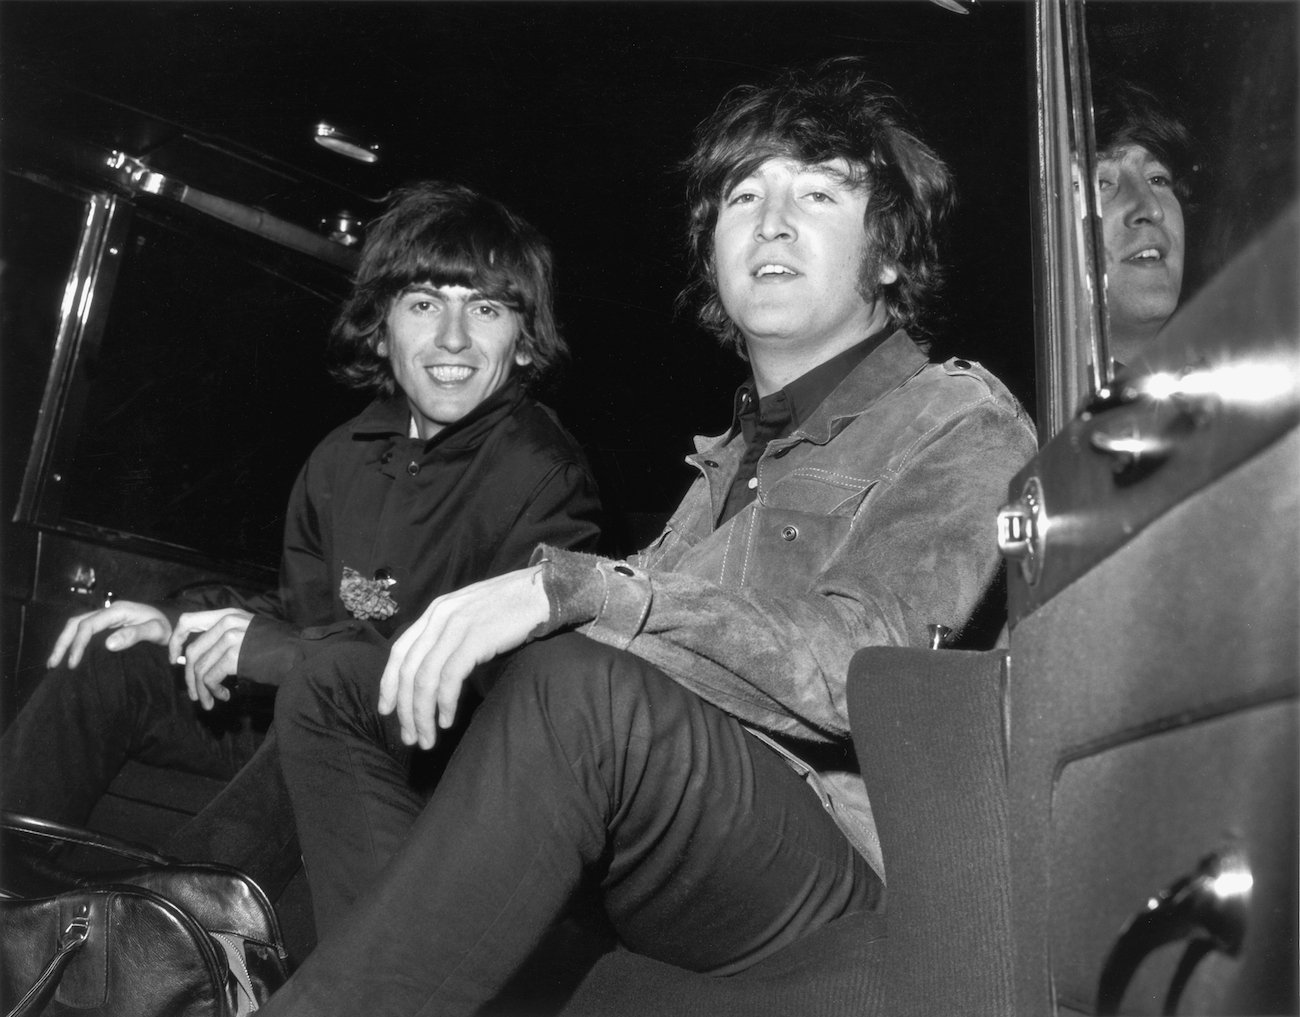 George Harrison and John Lennon at London Airport in 1965.